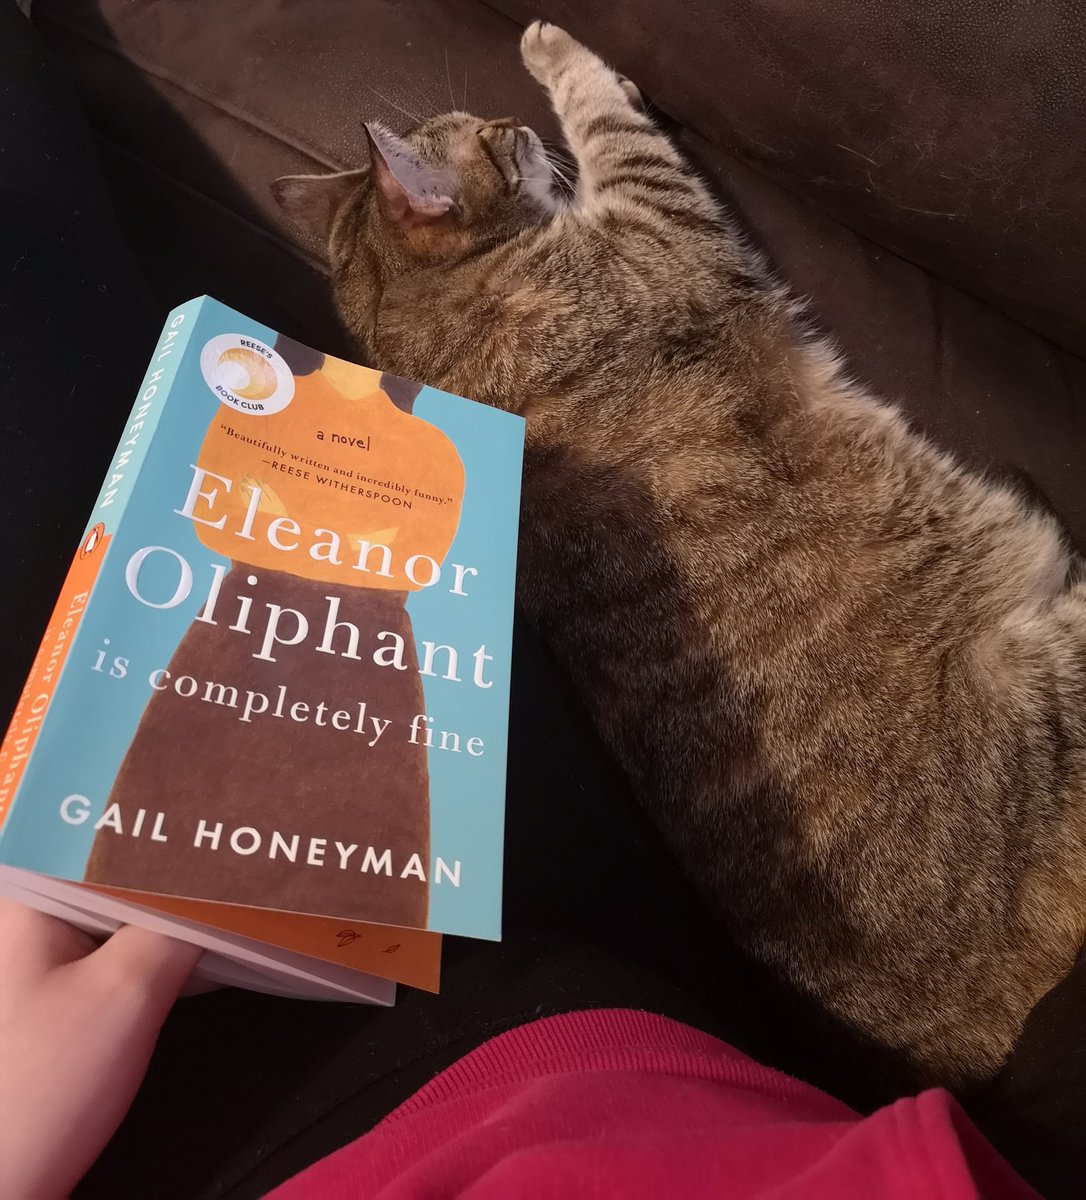 I think this might be one of my favourite books. I'm not sure what I was expecting, but I wasn't expecting to feel so many emotions. I love getting to know the complex being of Eleanor. Highly recommend! Eleanor Oliphant is Completely Fine by Gail Honeyman .5